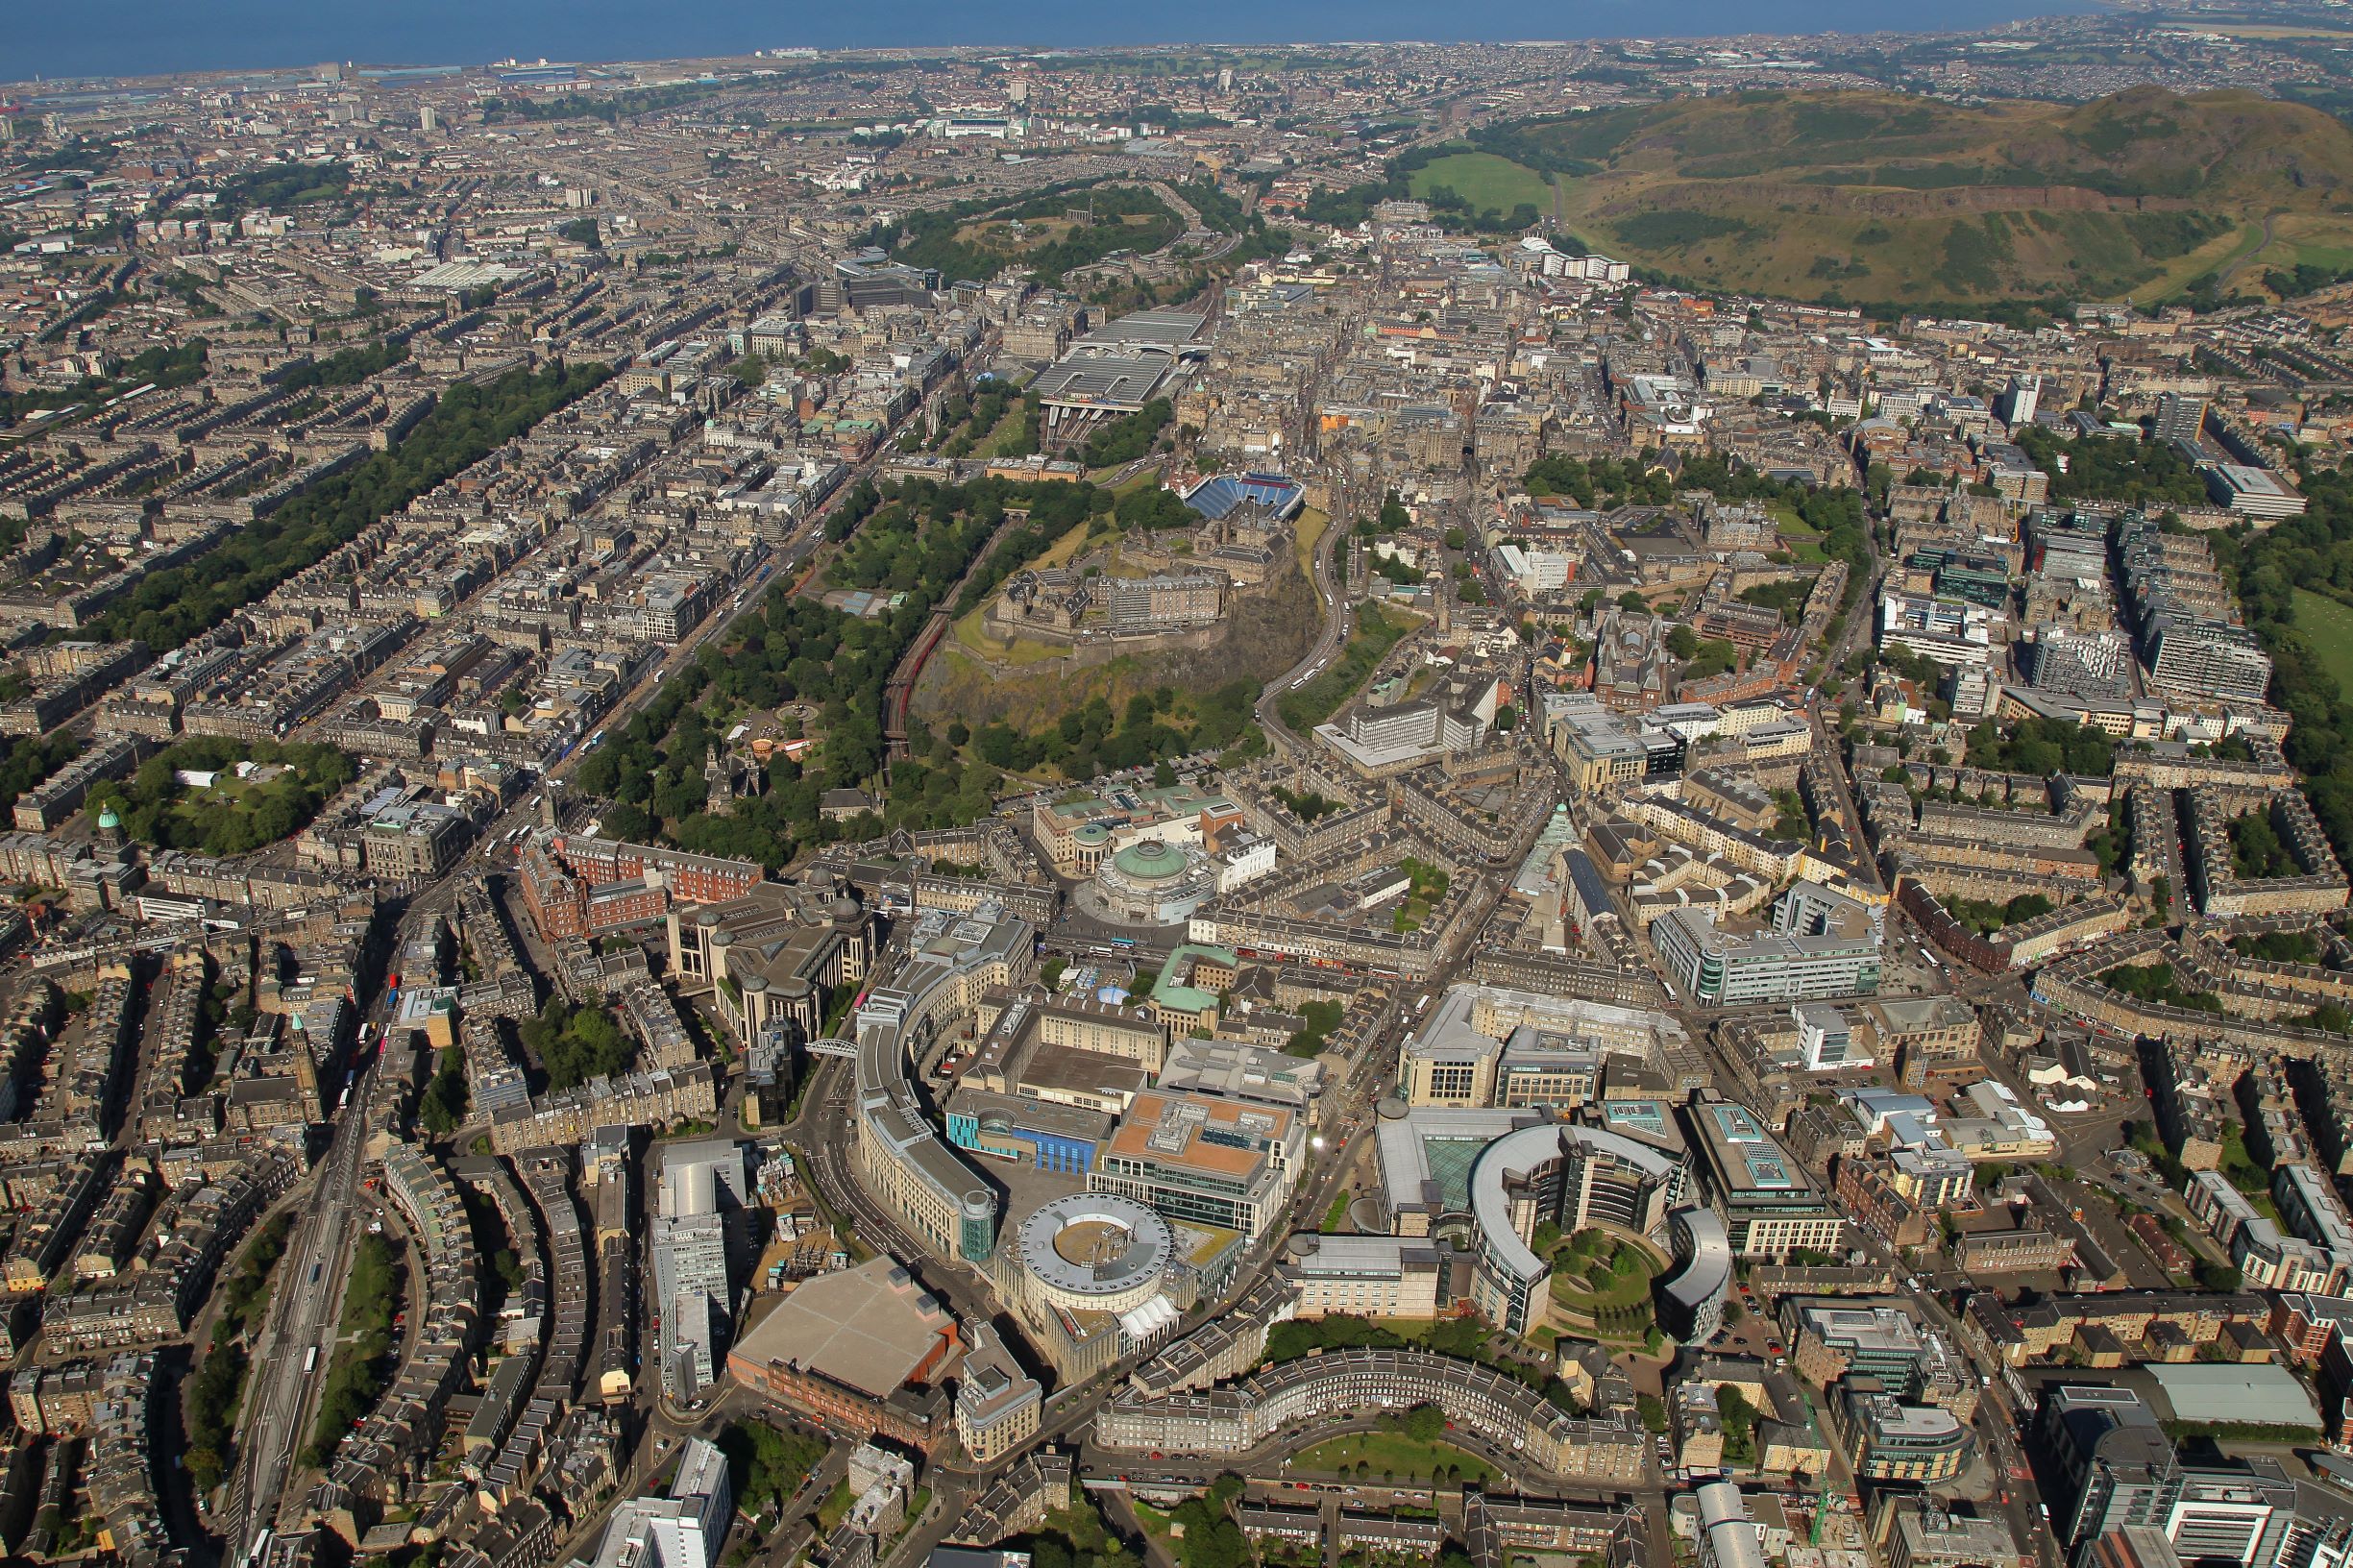 'Pragmatic' council budget planned for Edinburgh amid ongoing Covid uncertainty